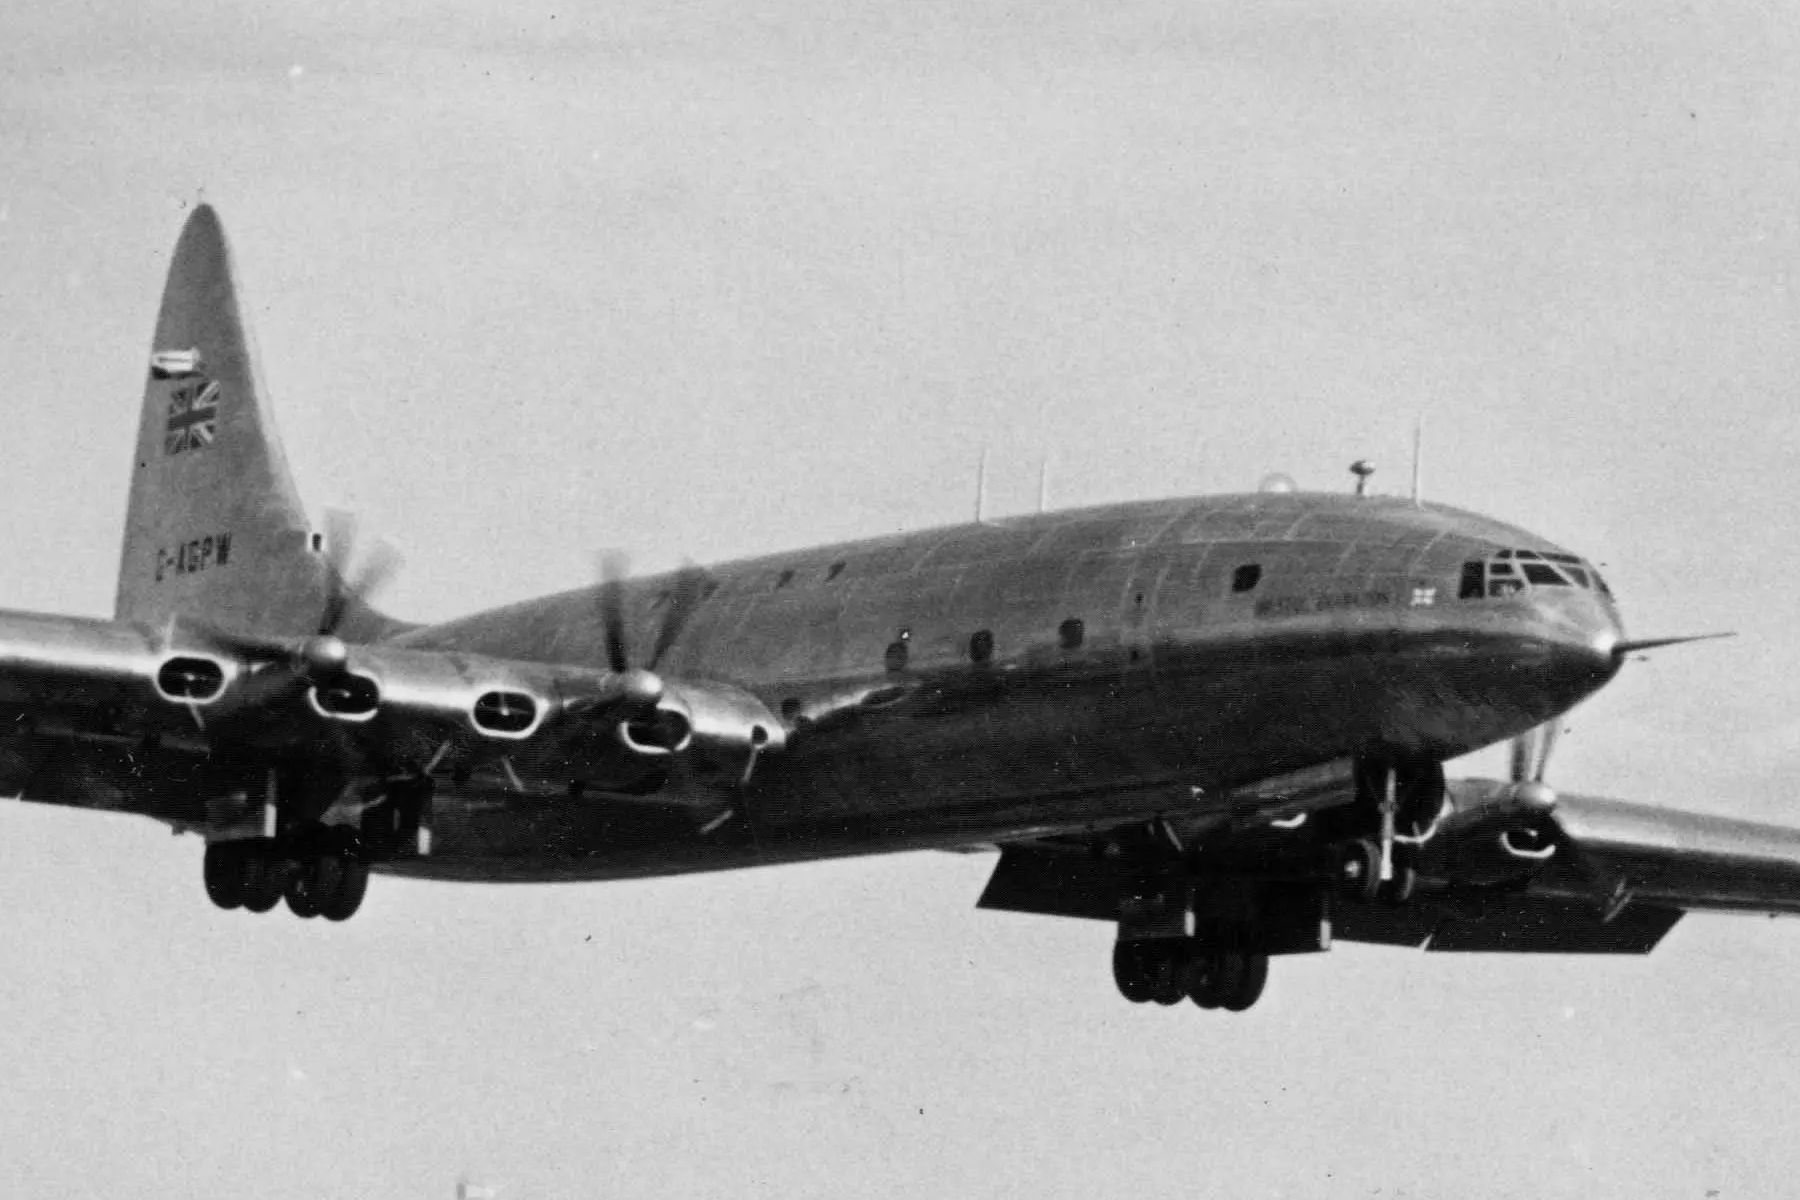 A black and white photo of the Bristol Brabazon flying in the sky.